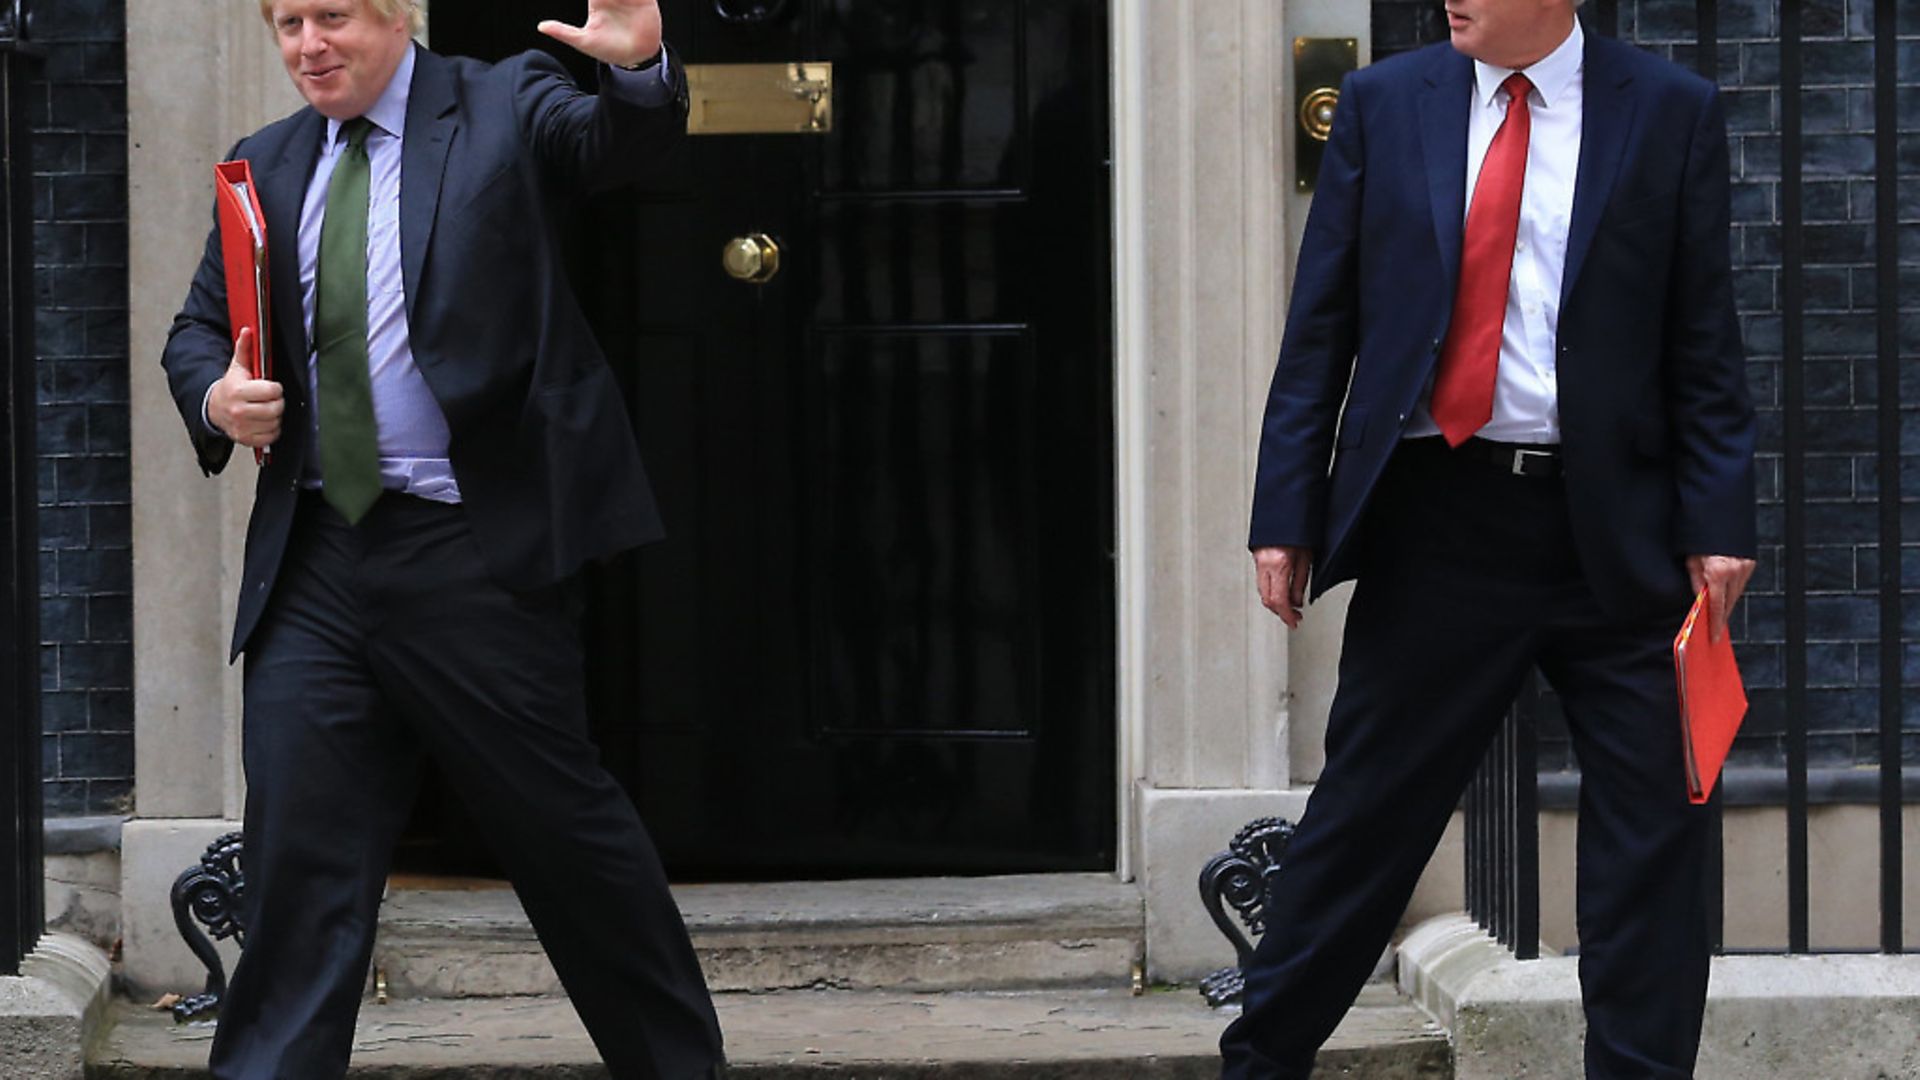 Boris Johnson and David Davis resigning from the government. Photo: PA / Gareth Fuller - Credit: PA Wire/PA Images